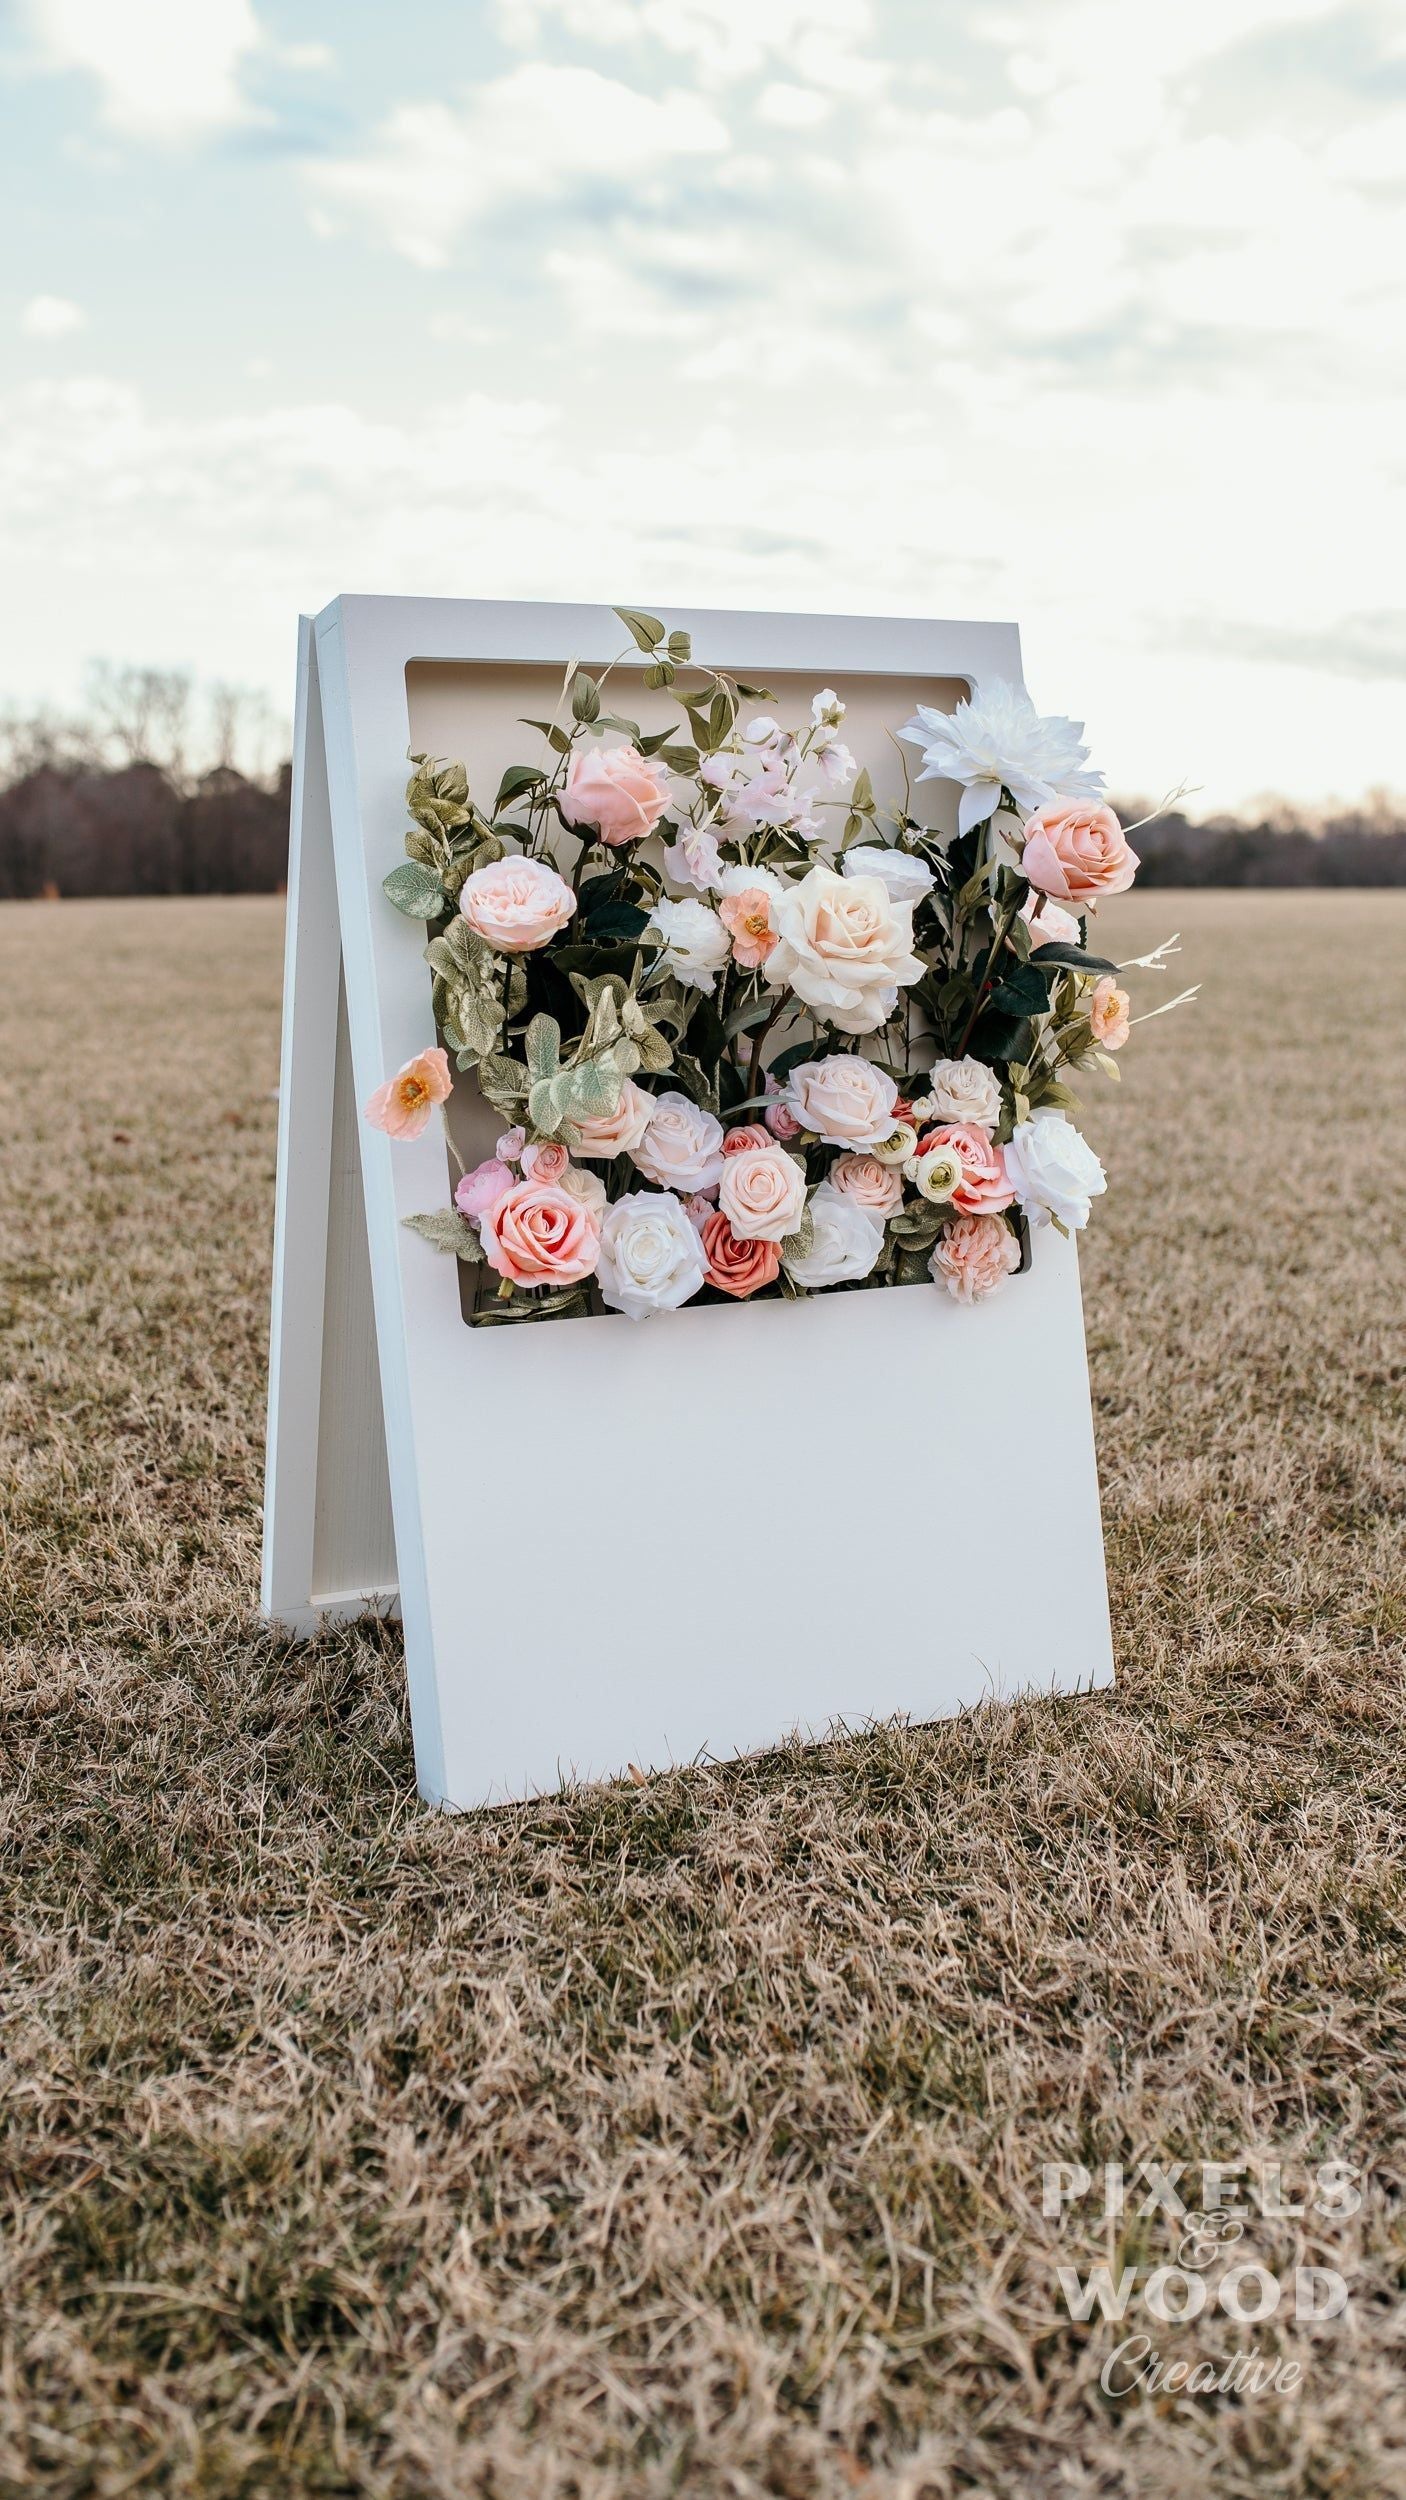 RENTAL Polaroid A-Frame Flower Box Sign - Welcome Personalized Sign - Wedding/Event